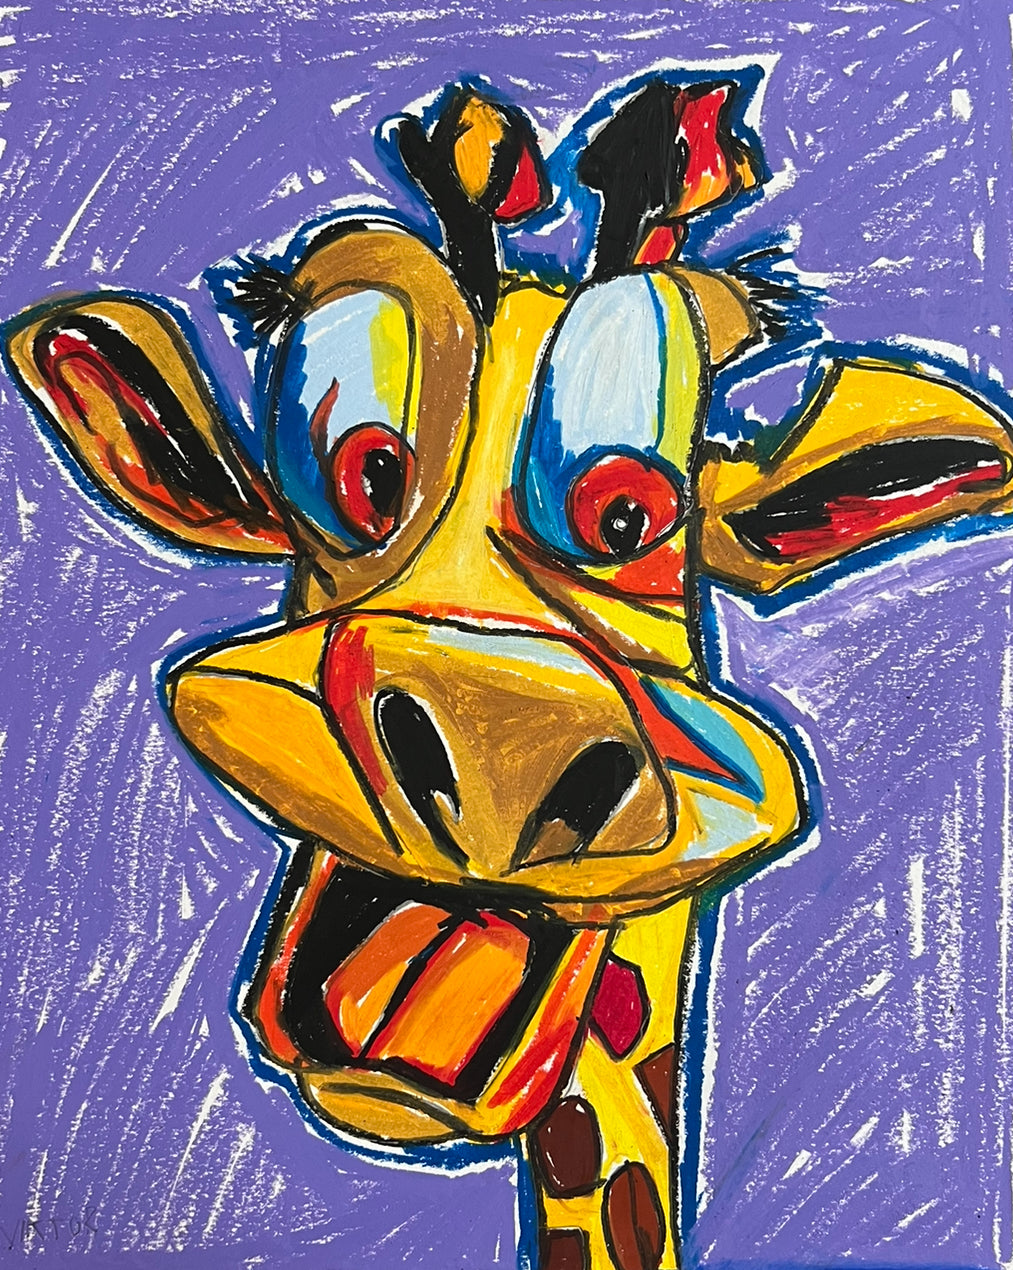 Sophie The Silly Giraffe - fine prints and canvas prints in more size